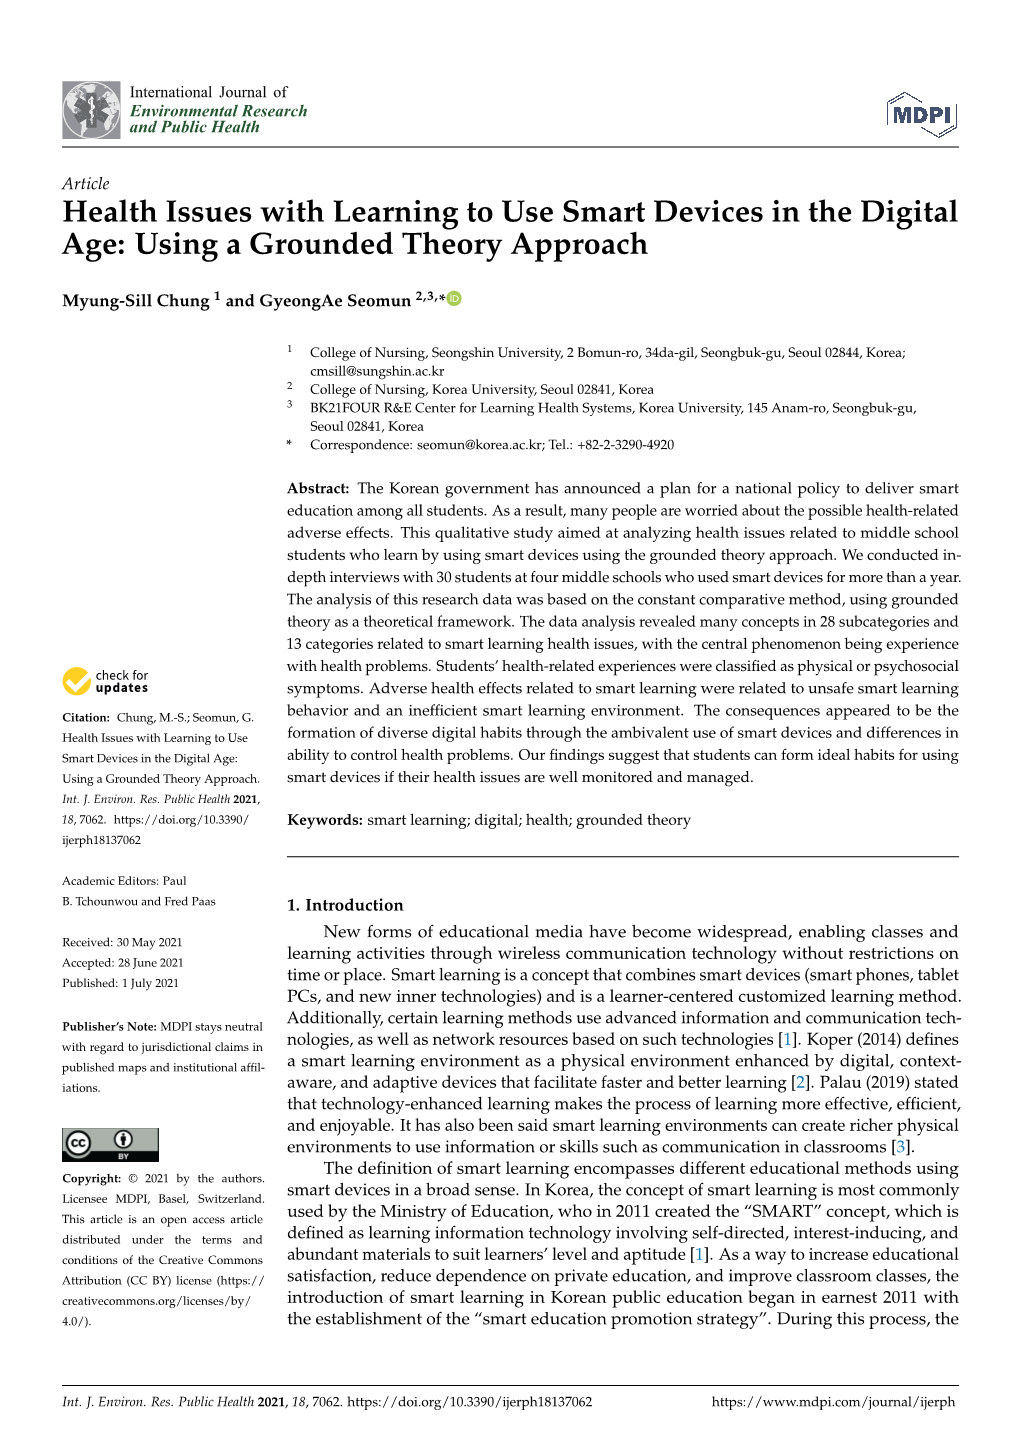 Health Issues with Learning to Use Smart Devices in the Digital Age: Using a Grounded Theory Approach